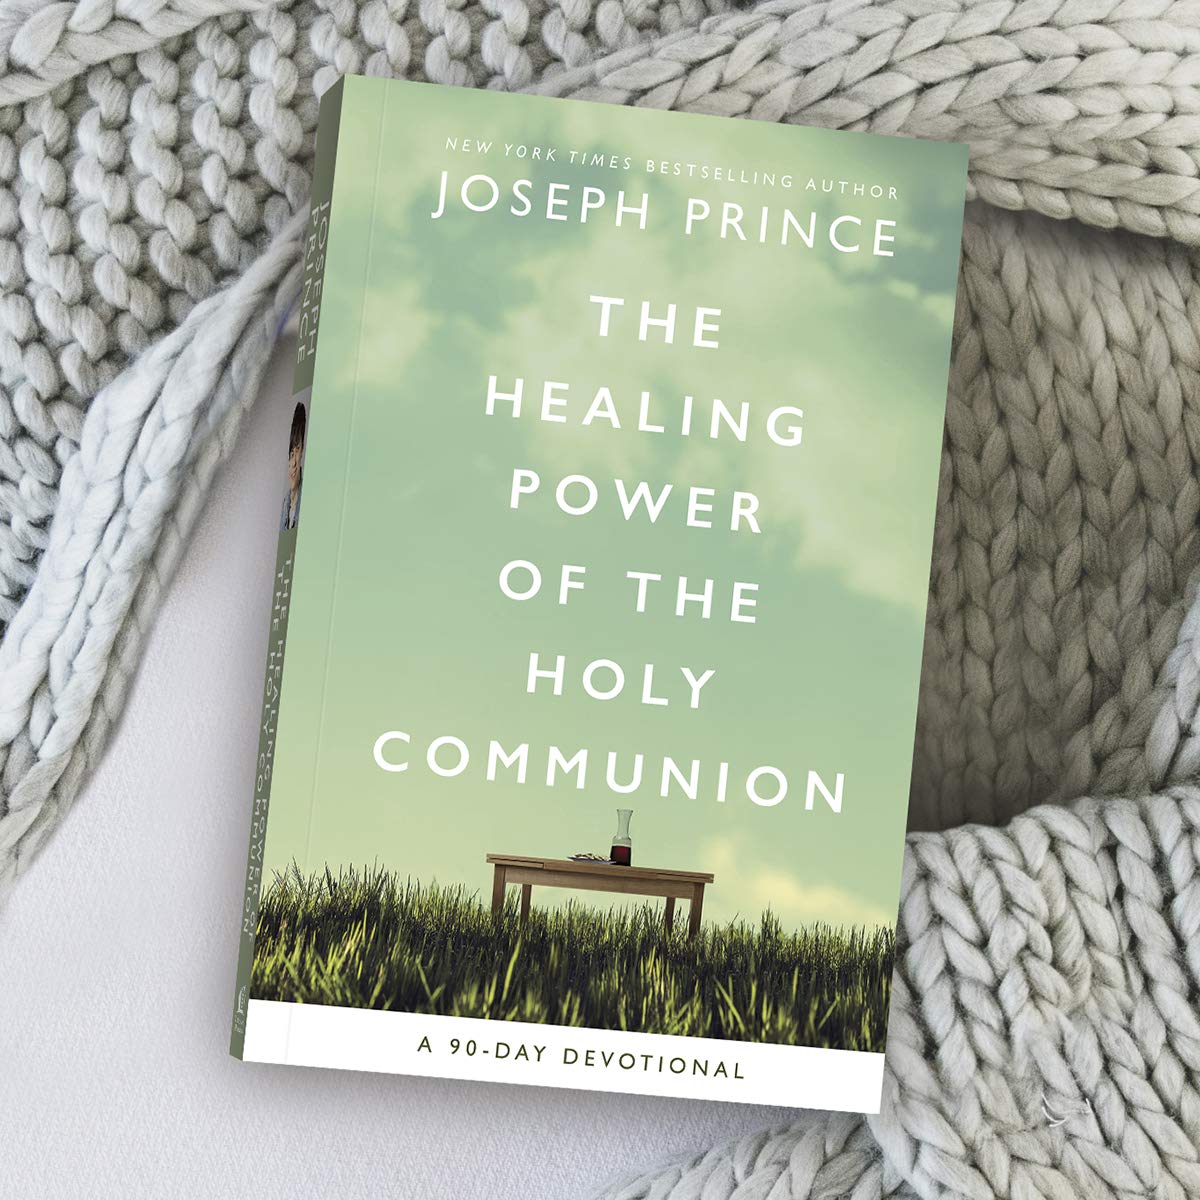 Communion/Book - The Healing Power of the Holy Communion